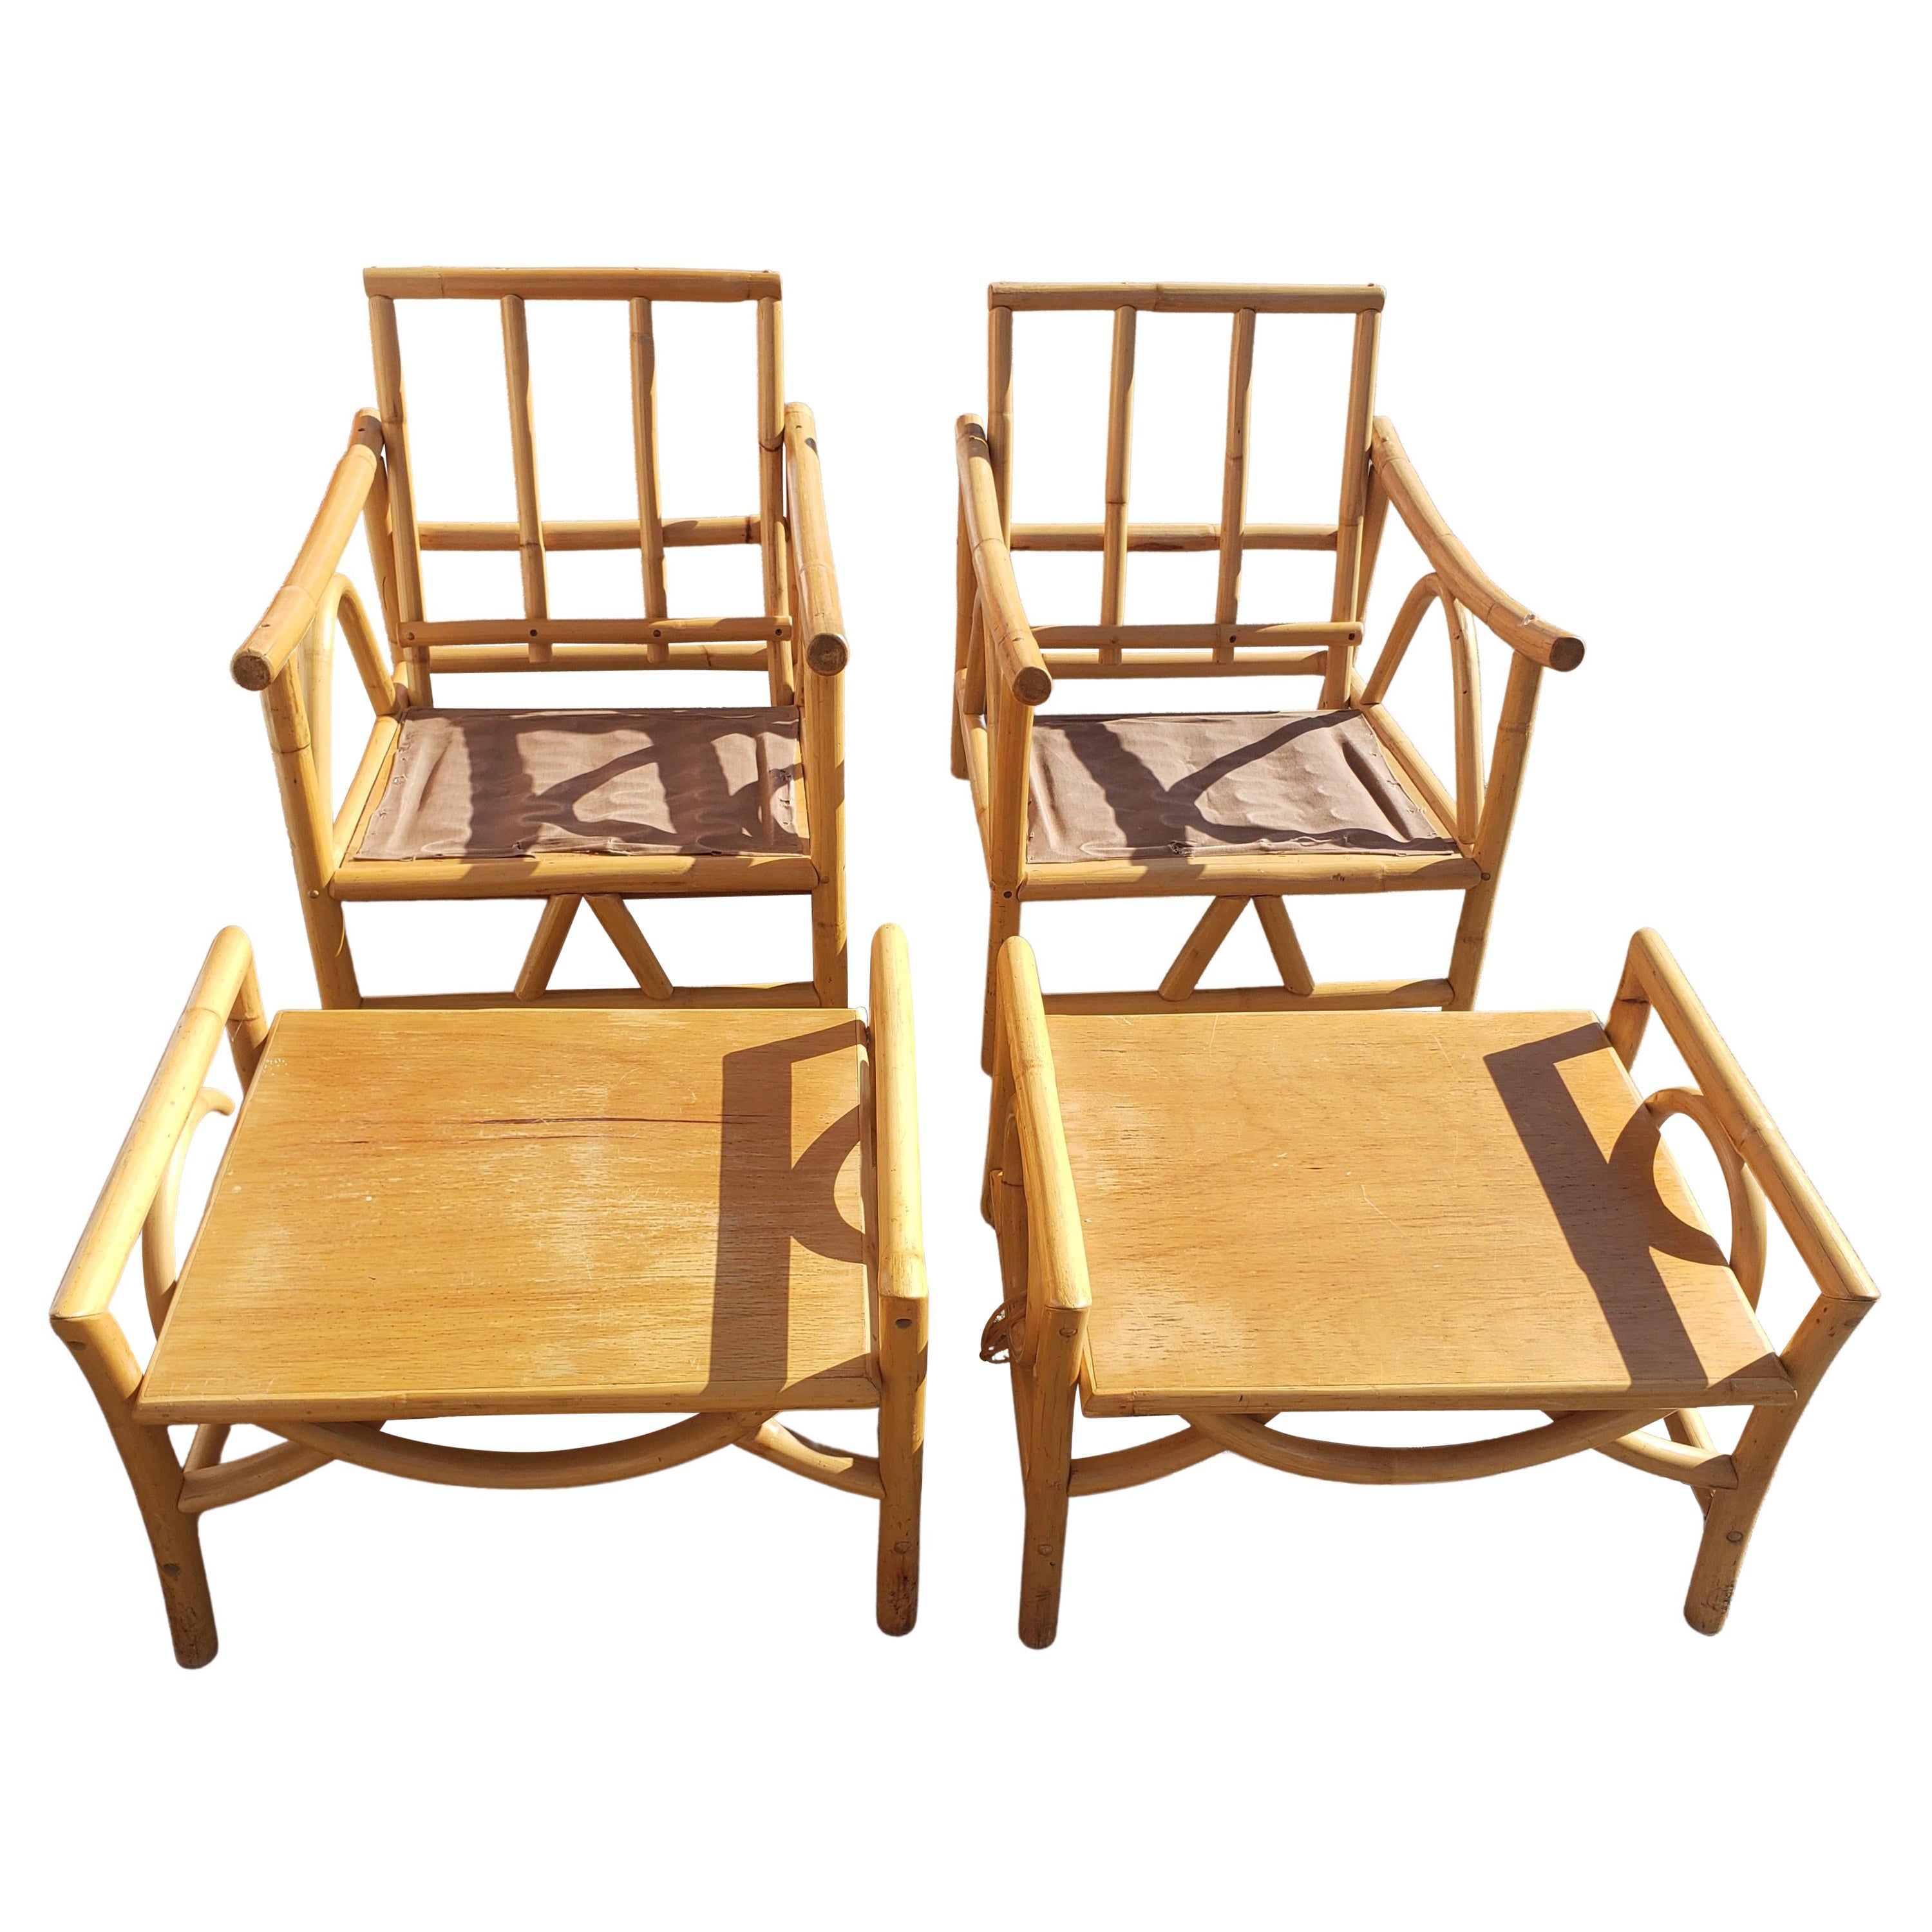 1960s Bam Tan Rattan Bamboo Lounge Chair with Ottoman, a Pair